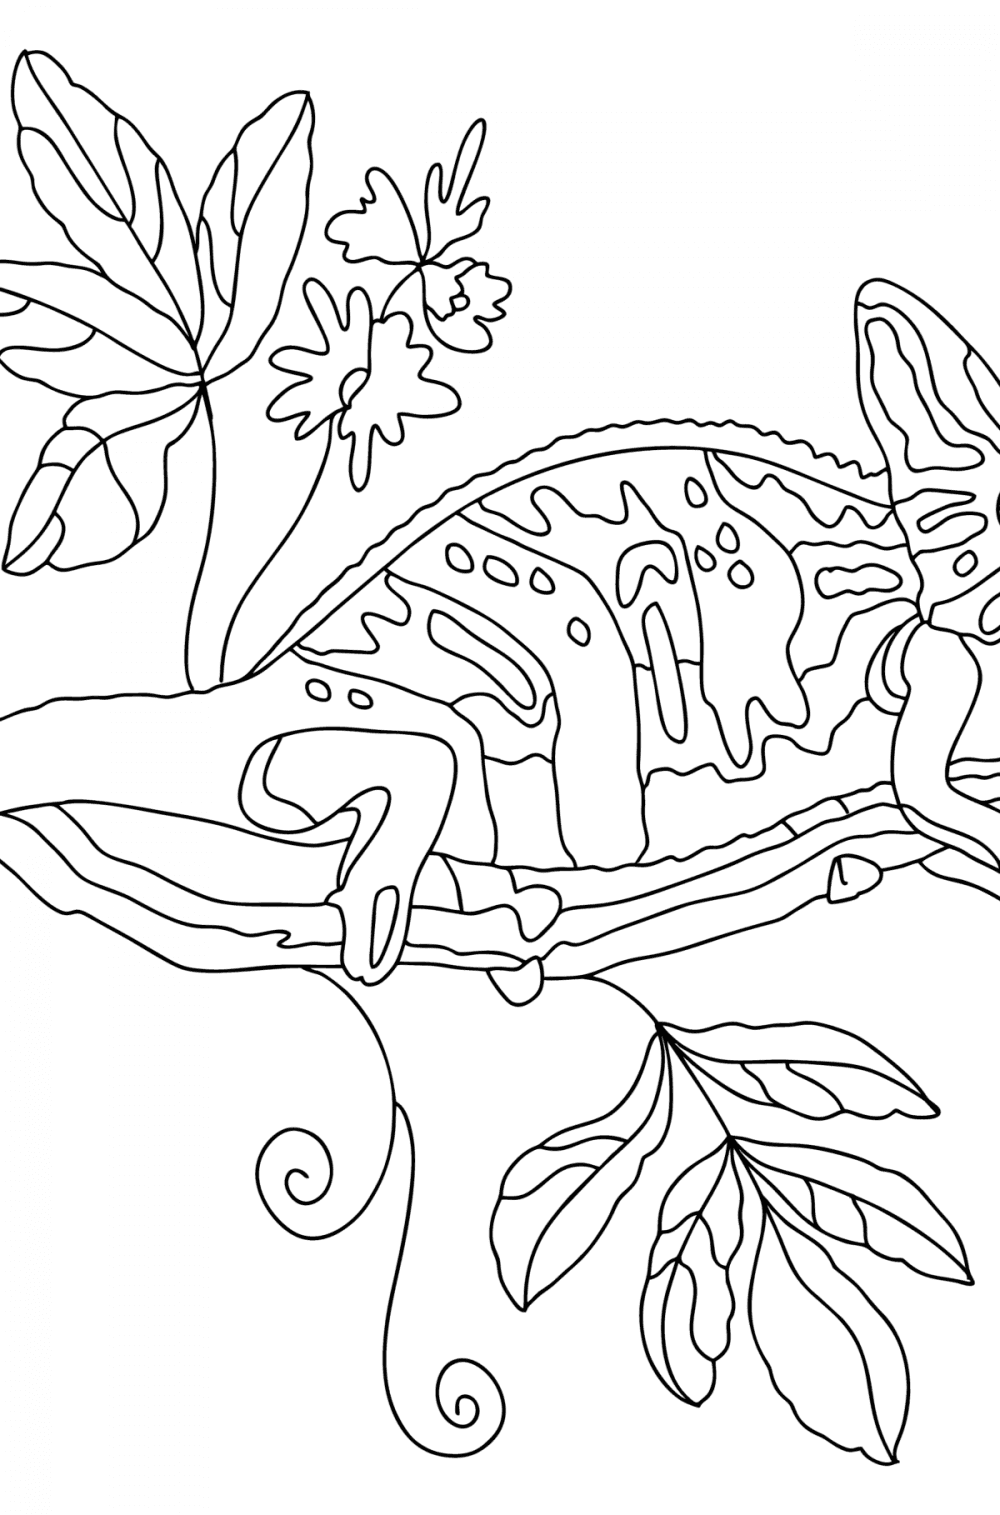 Chameleons coloring pages - Download, Print, and Color Online!